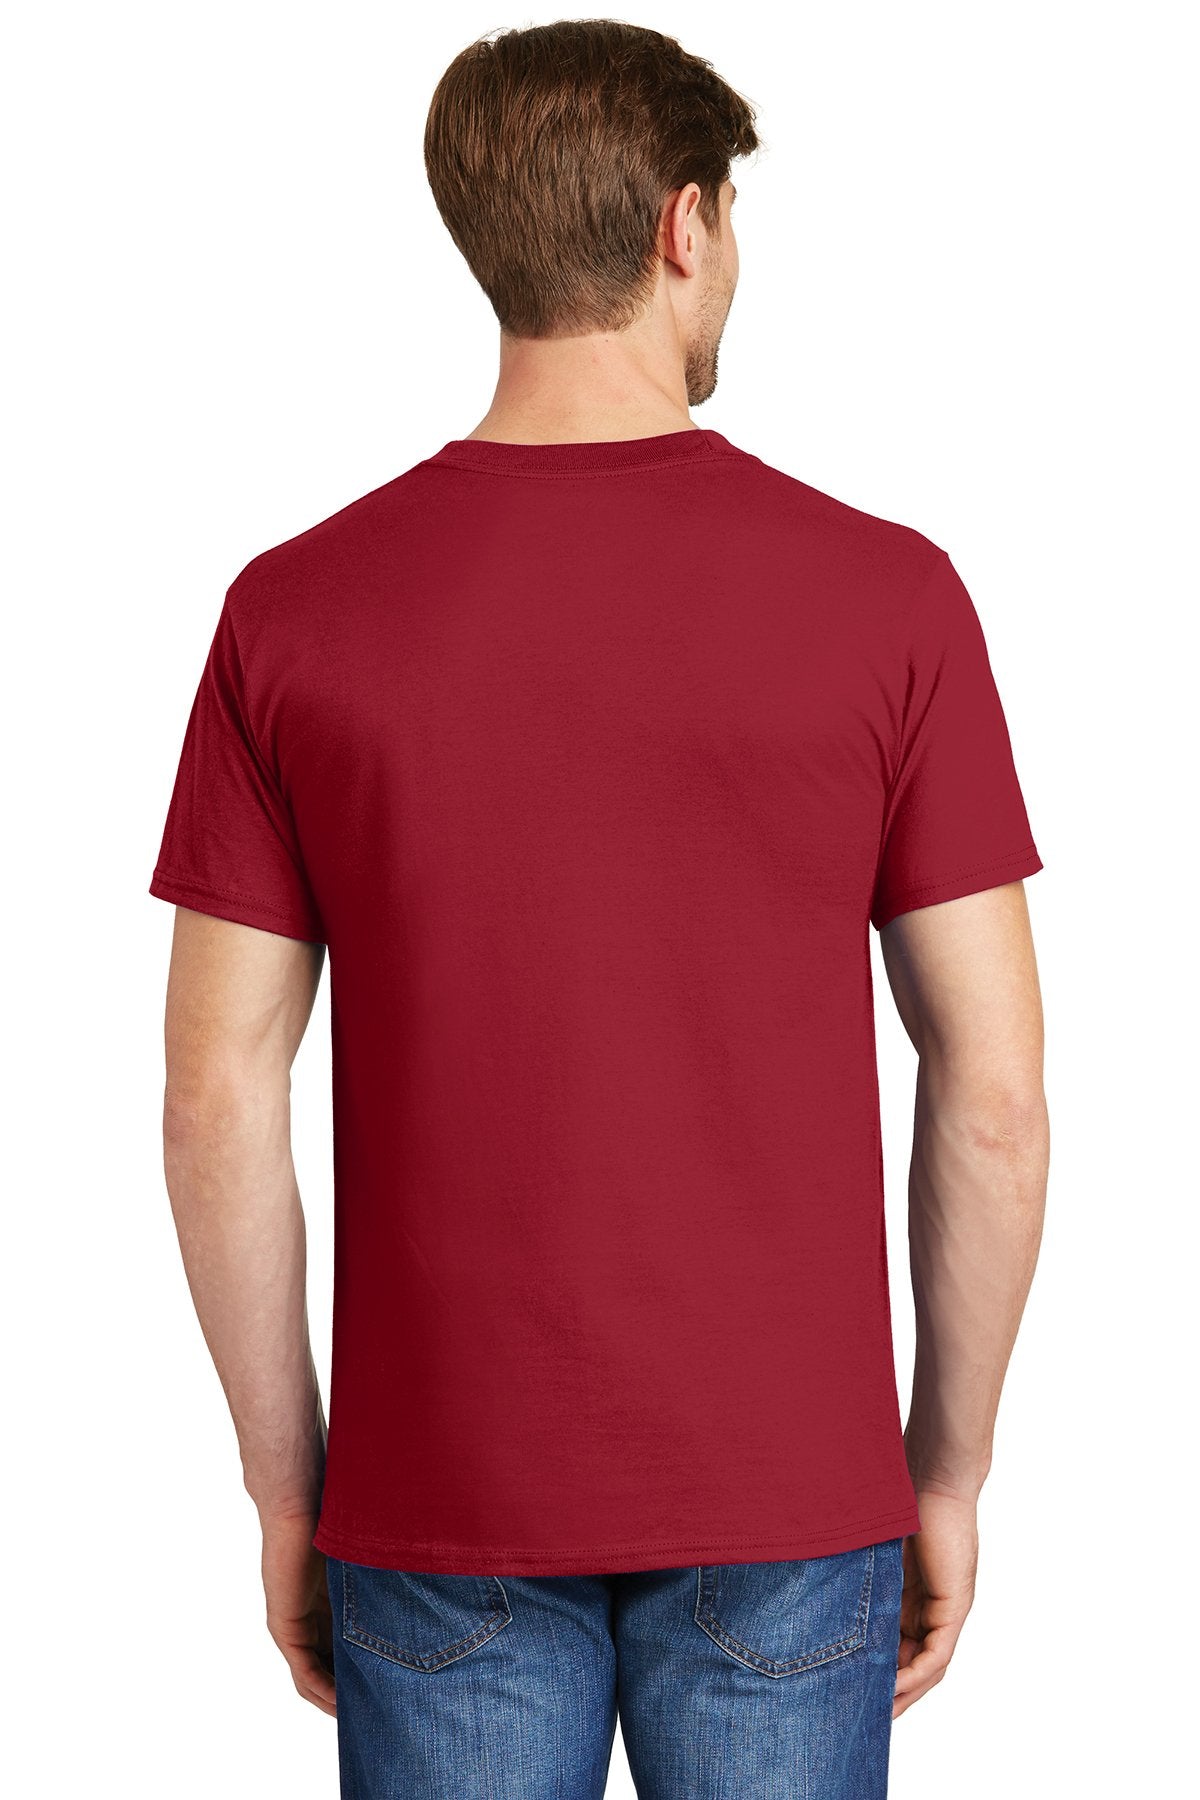 hanes beefy cotton t shirt with pocket 5190 deep red